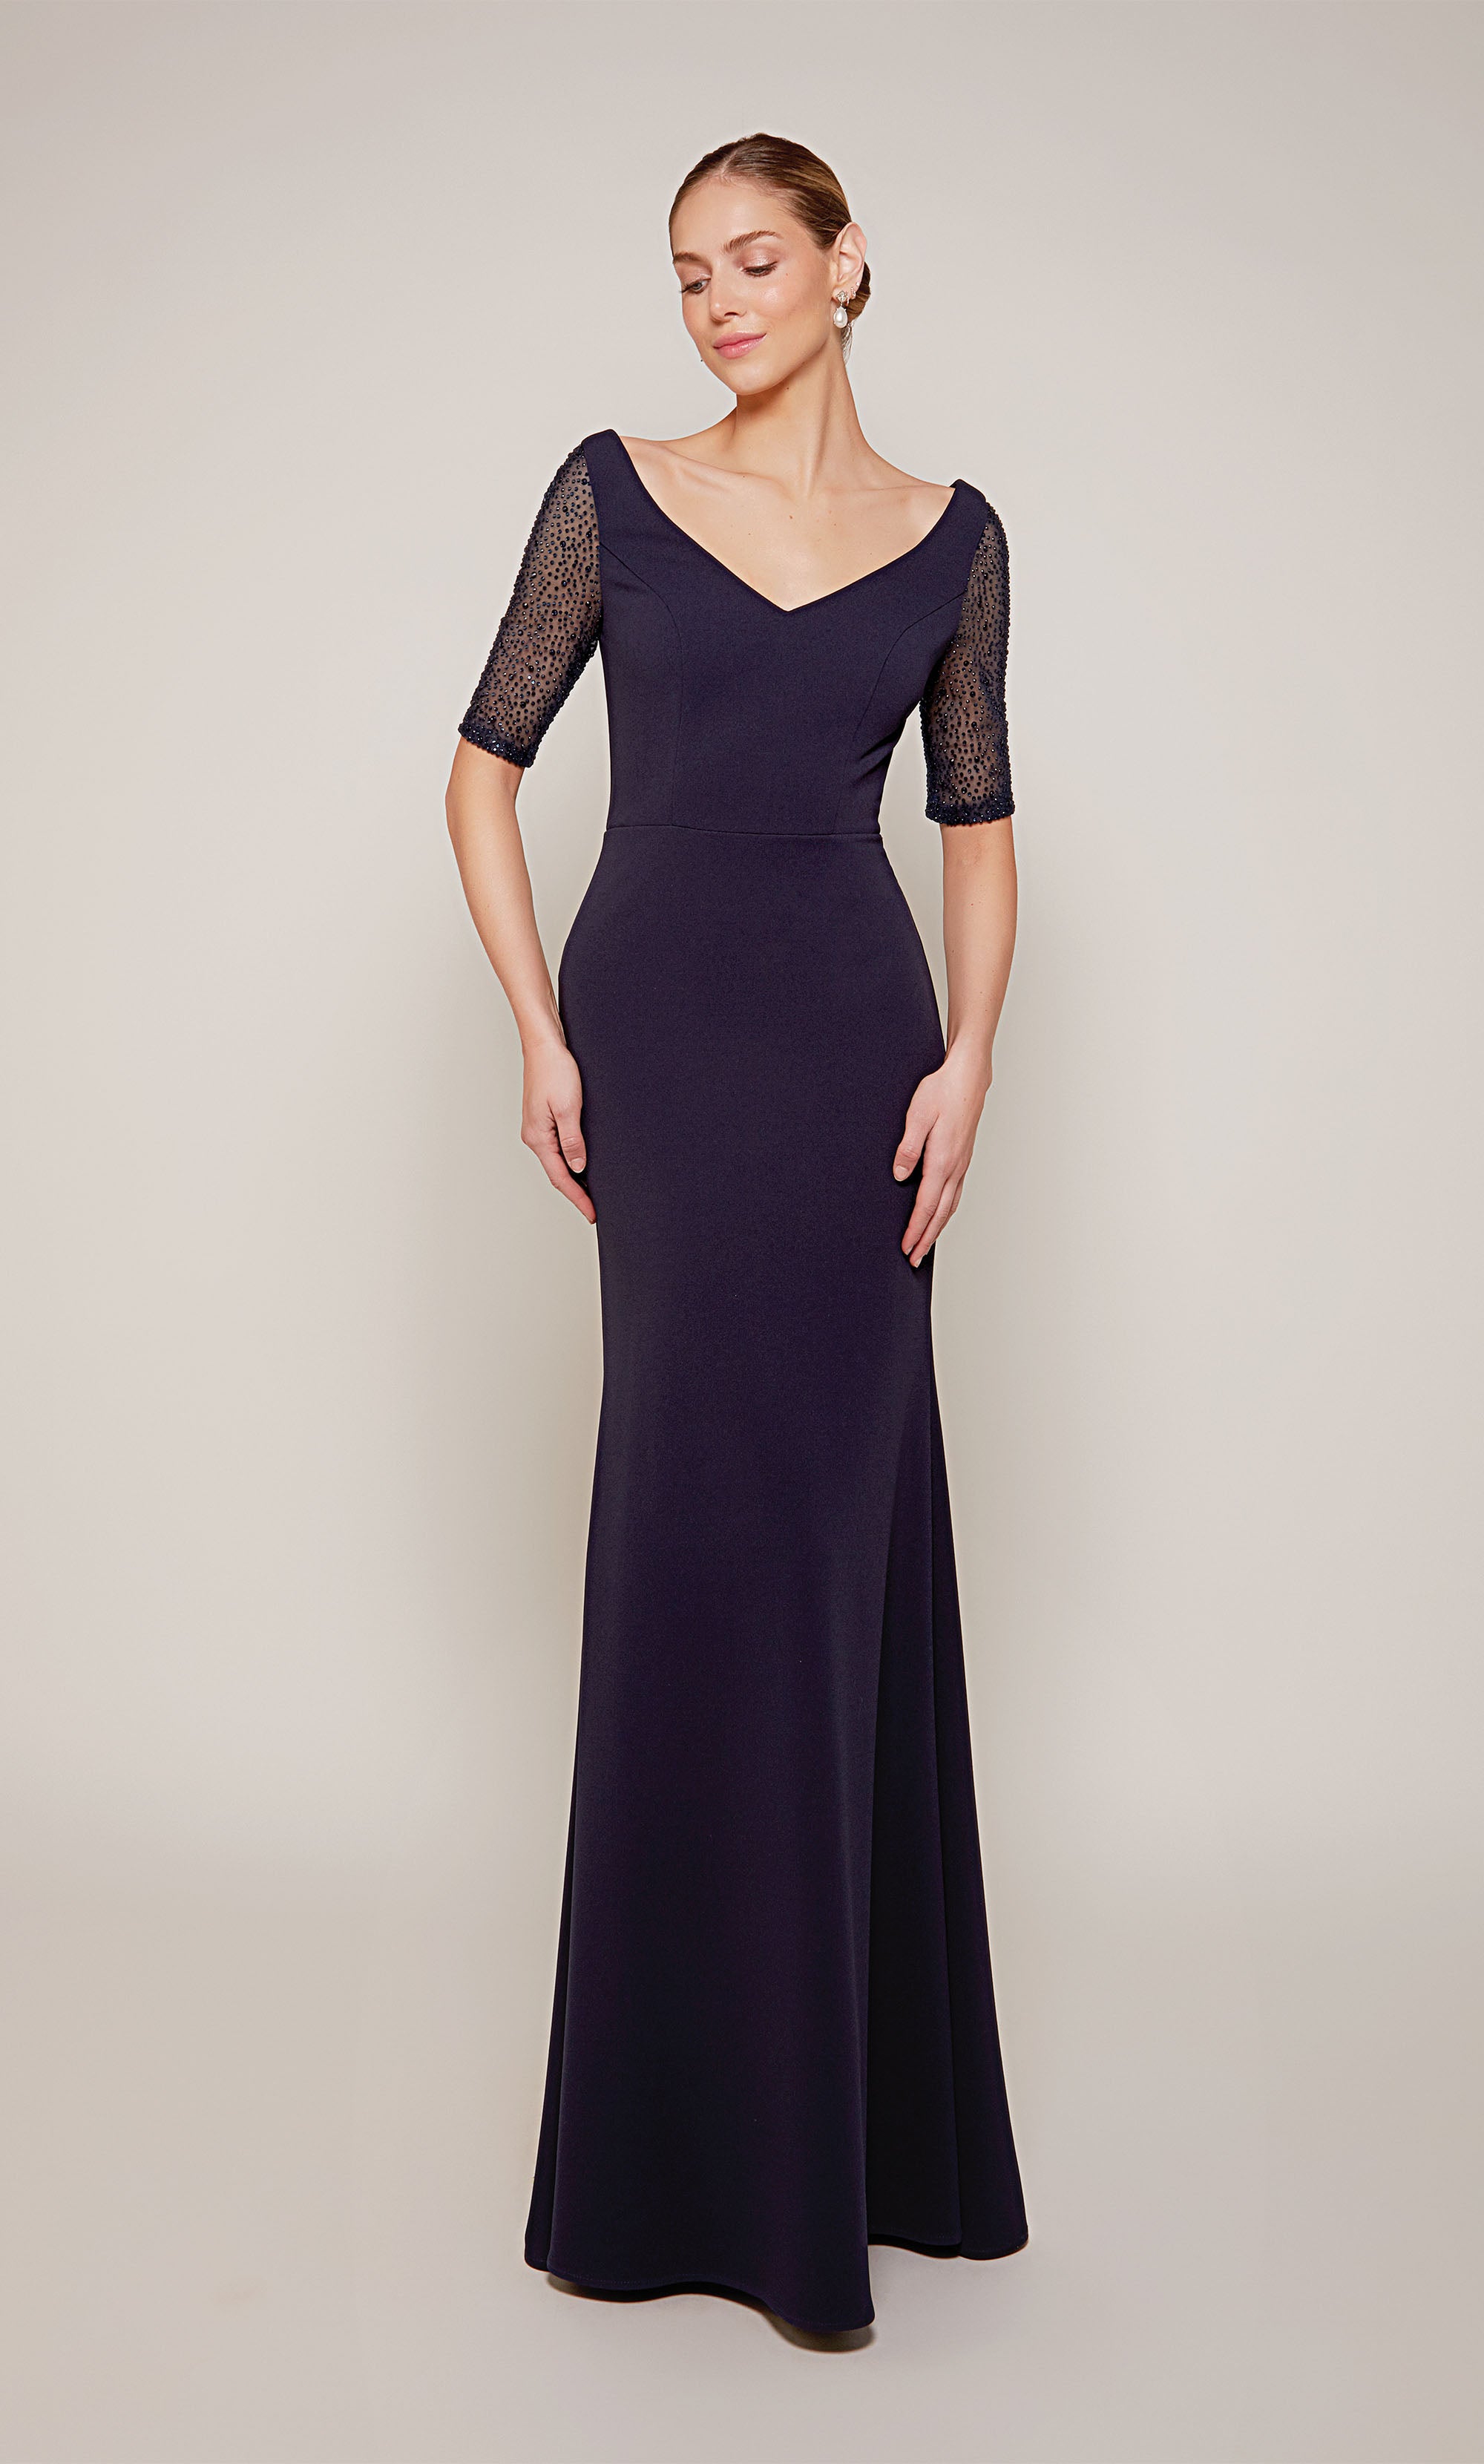 A long navy wedding guest dress with a wide V-neckline, short embellished sleeves, and a fitted skirt that flares slightly from the knee to the bottom of the hemline.